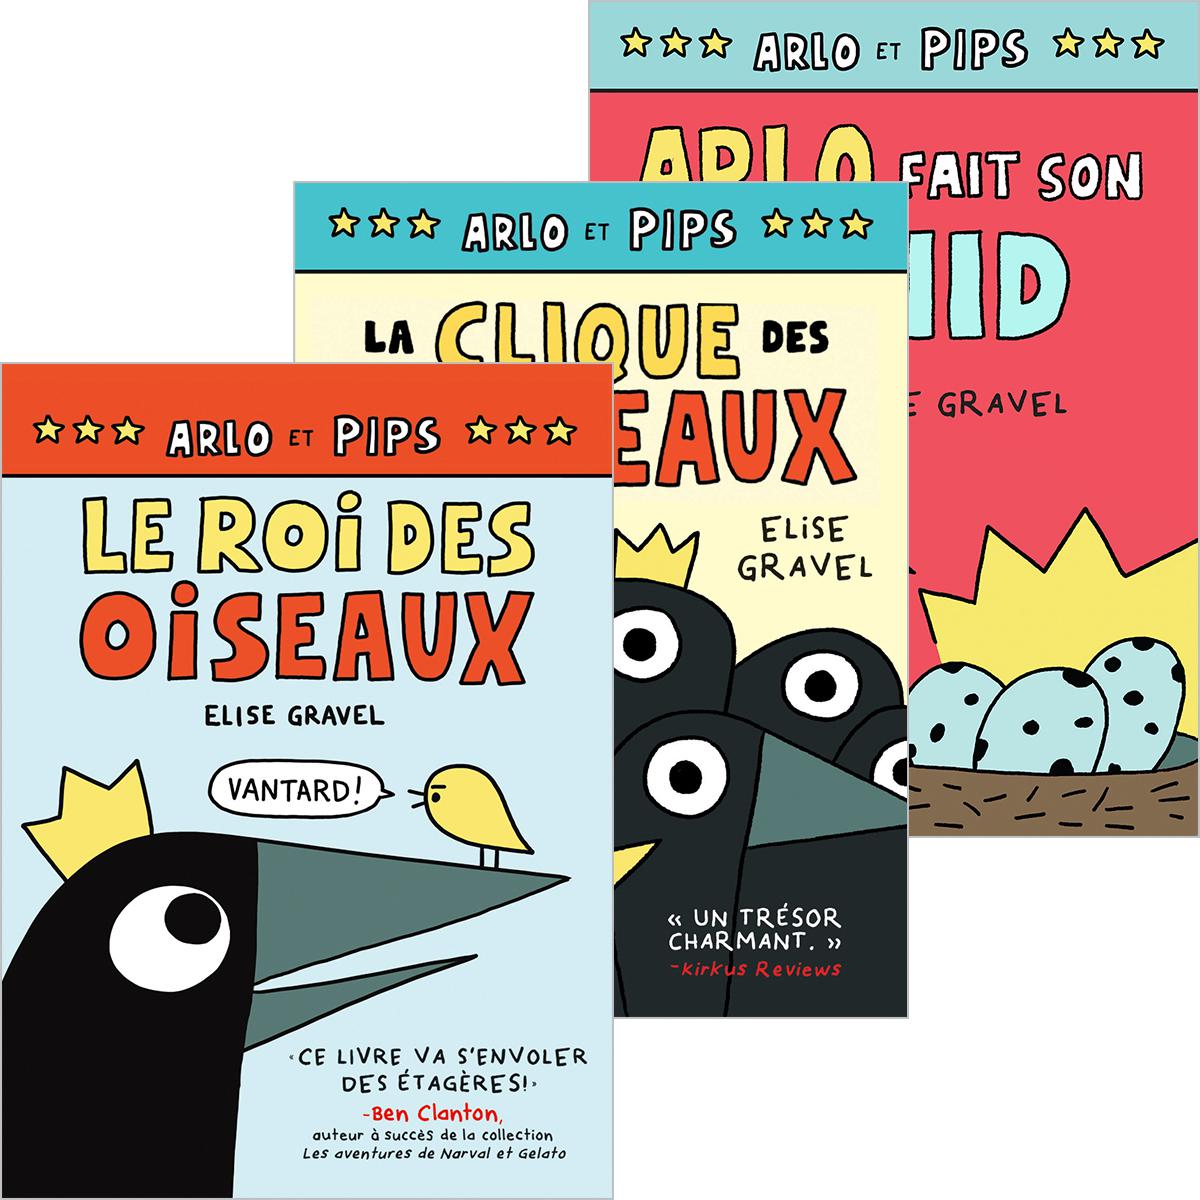  Collection Arlo et Pips 